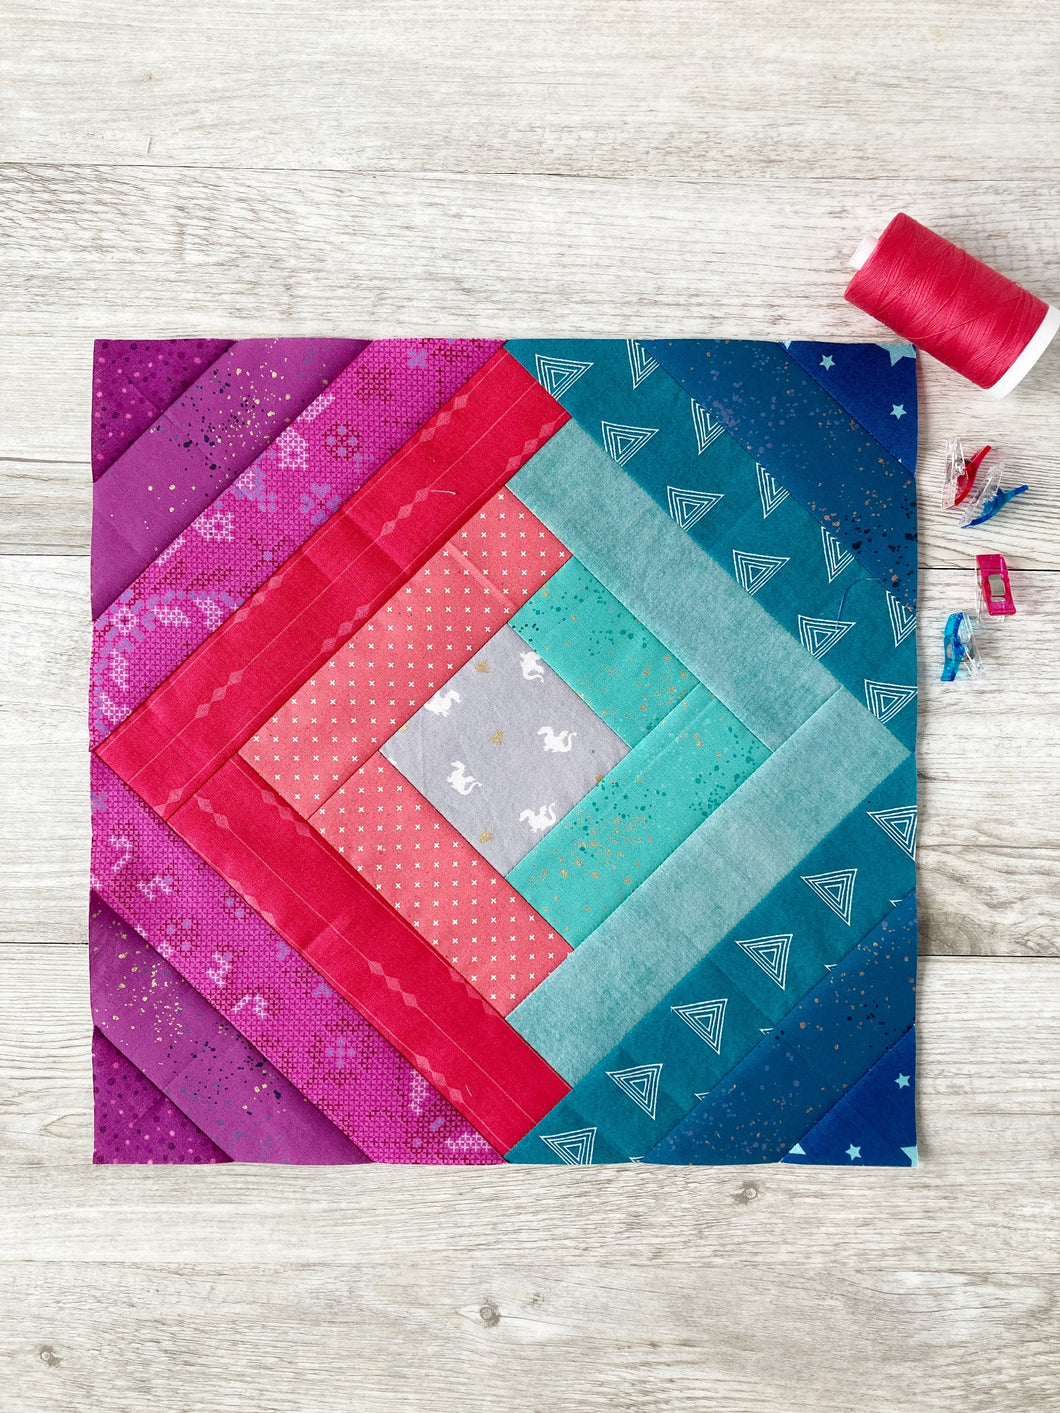 Twisted Log Cabin Quilt Block (traditional) - PDF